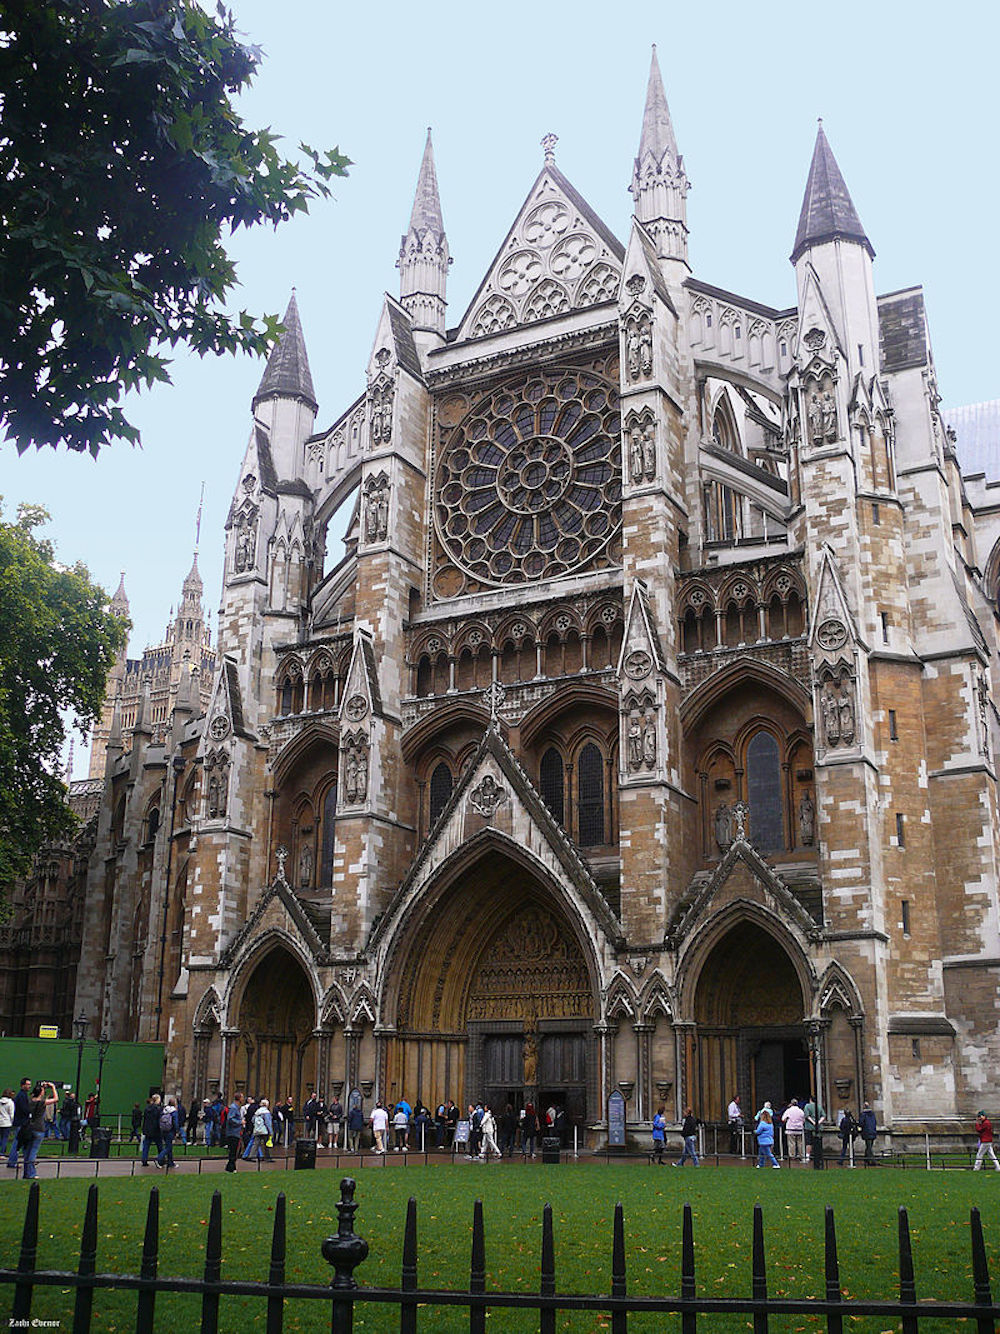 Westminster Abbey: North Facade, built in Gothic style. Photo Credit: © MathKnight and Zachi Evenor via Wikimedia Commons.